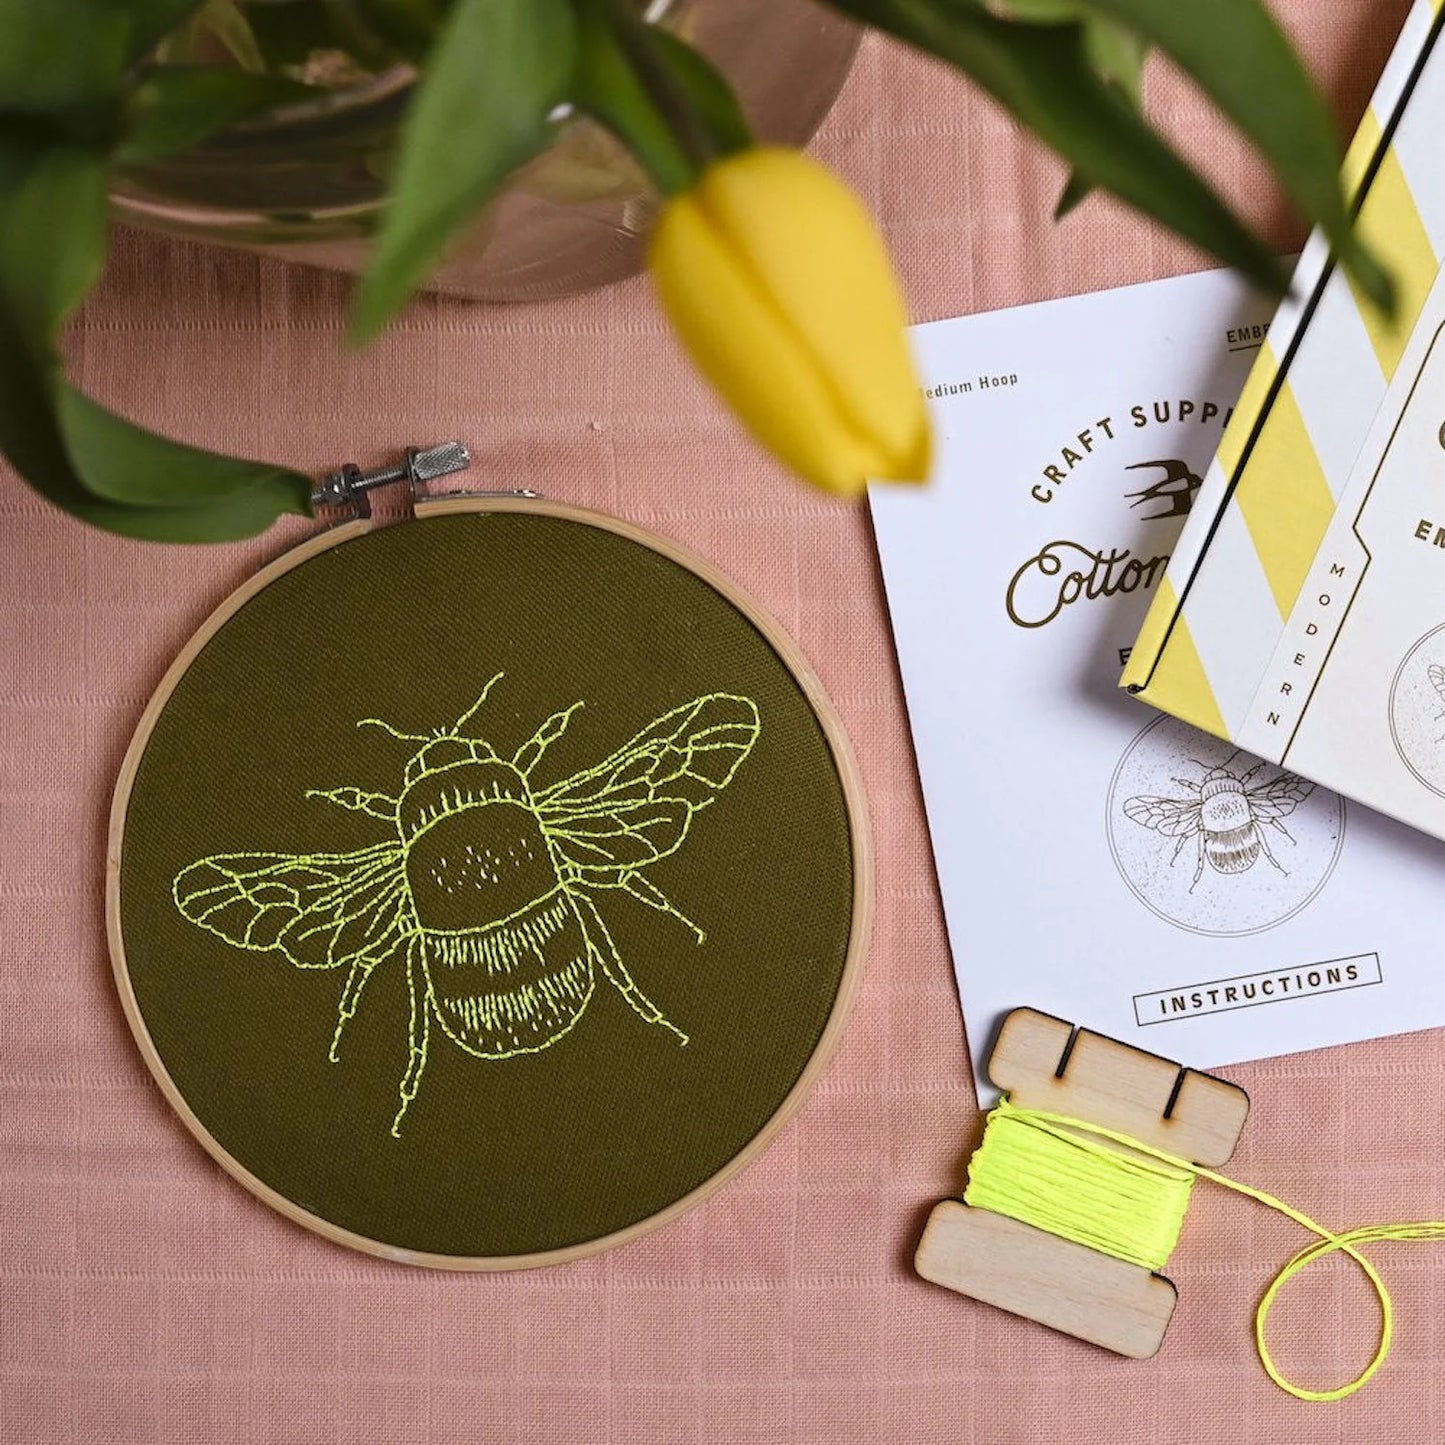 Bee Embroidery Hoop Kit By Cotton Clara